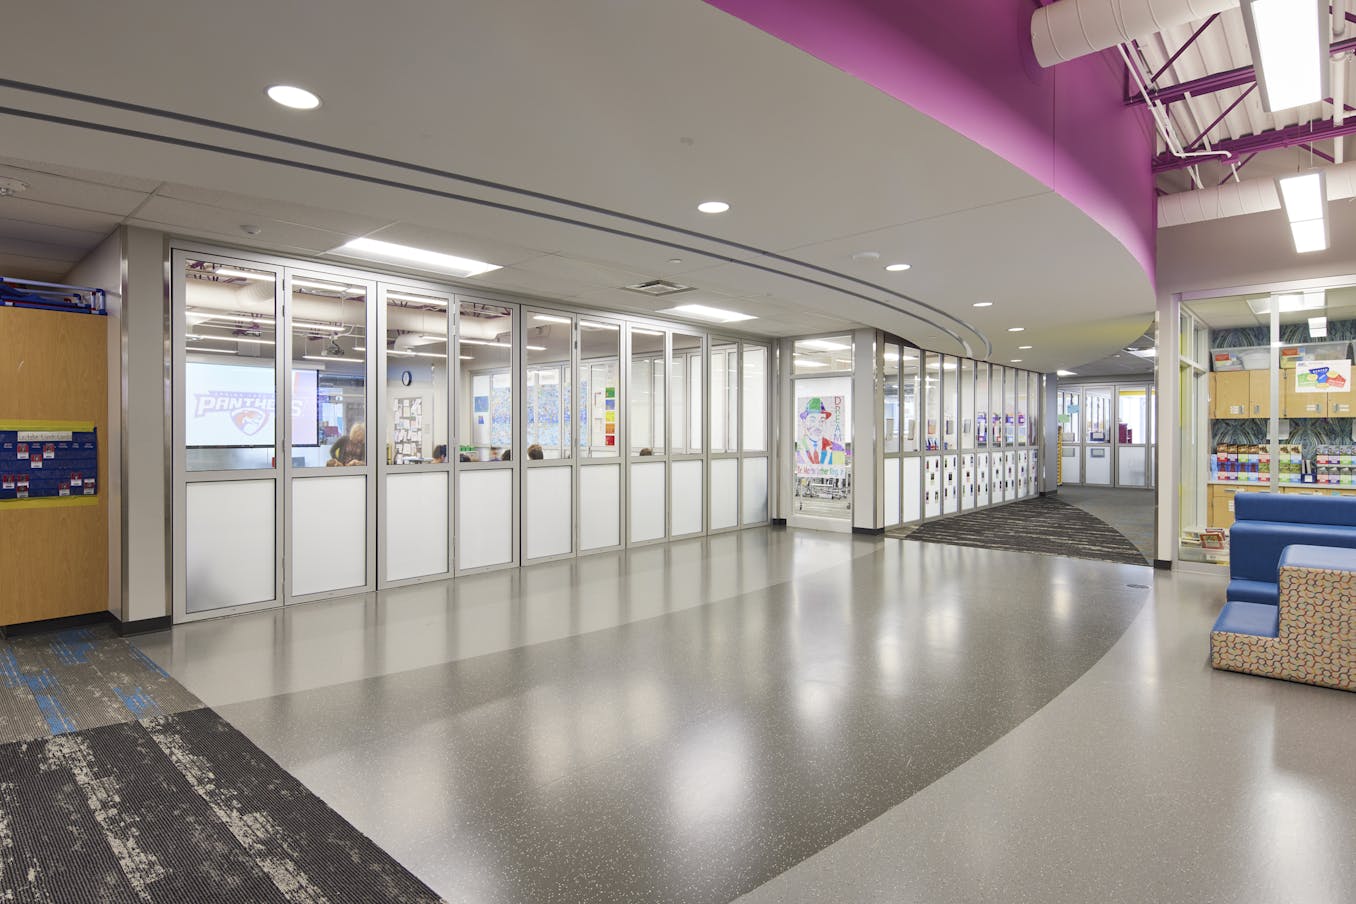 Centerview Elementary with white folding glass walls dividing the classrooms